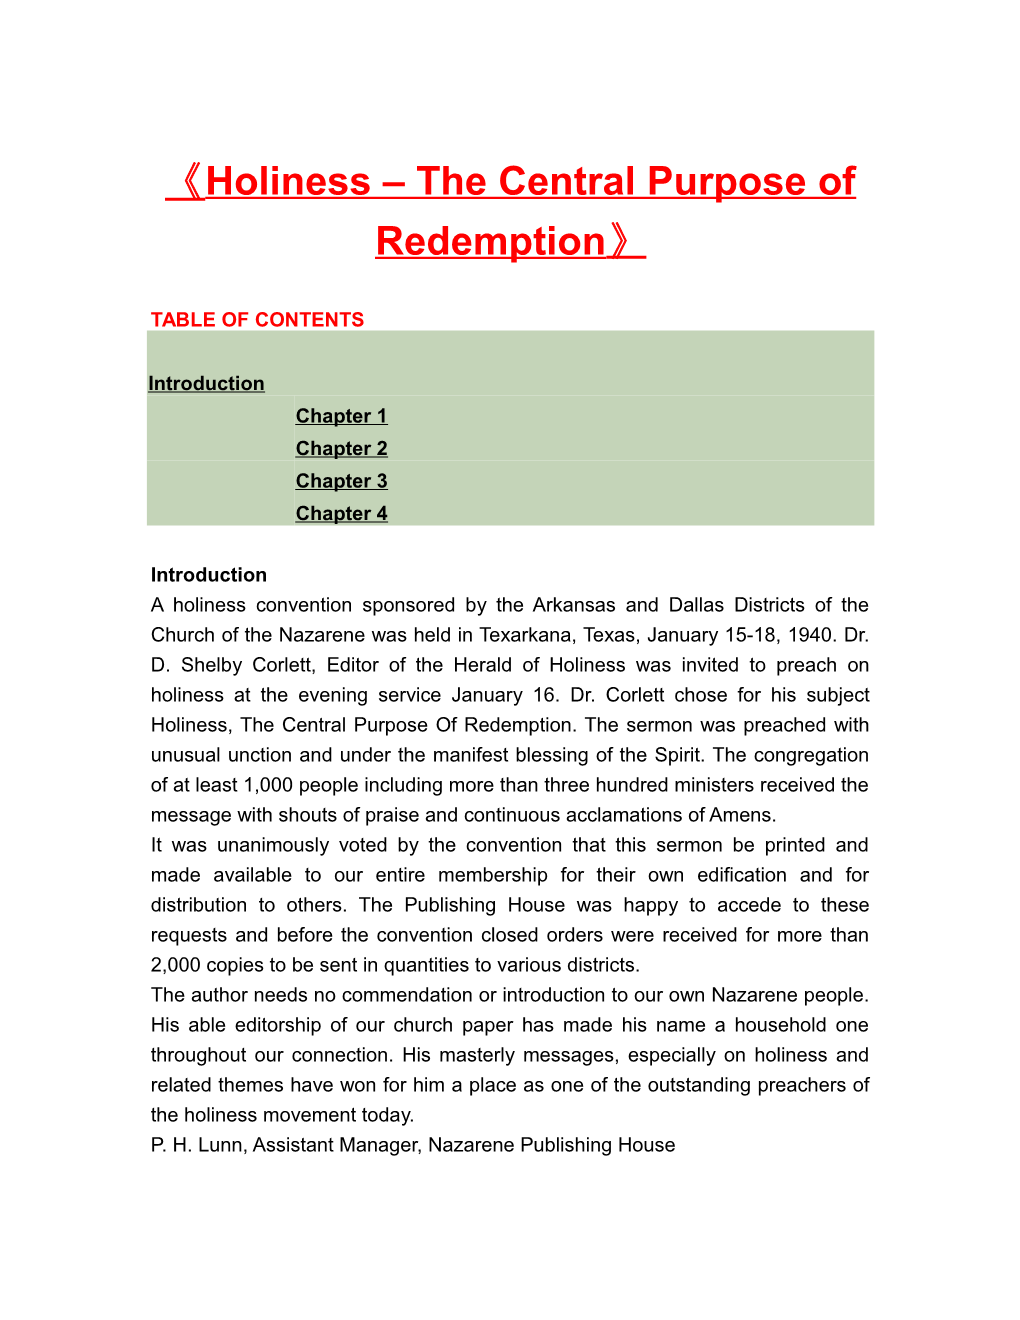 Holiness the Central Purpose of Redemption